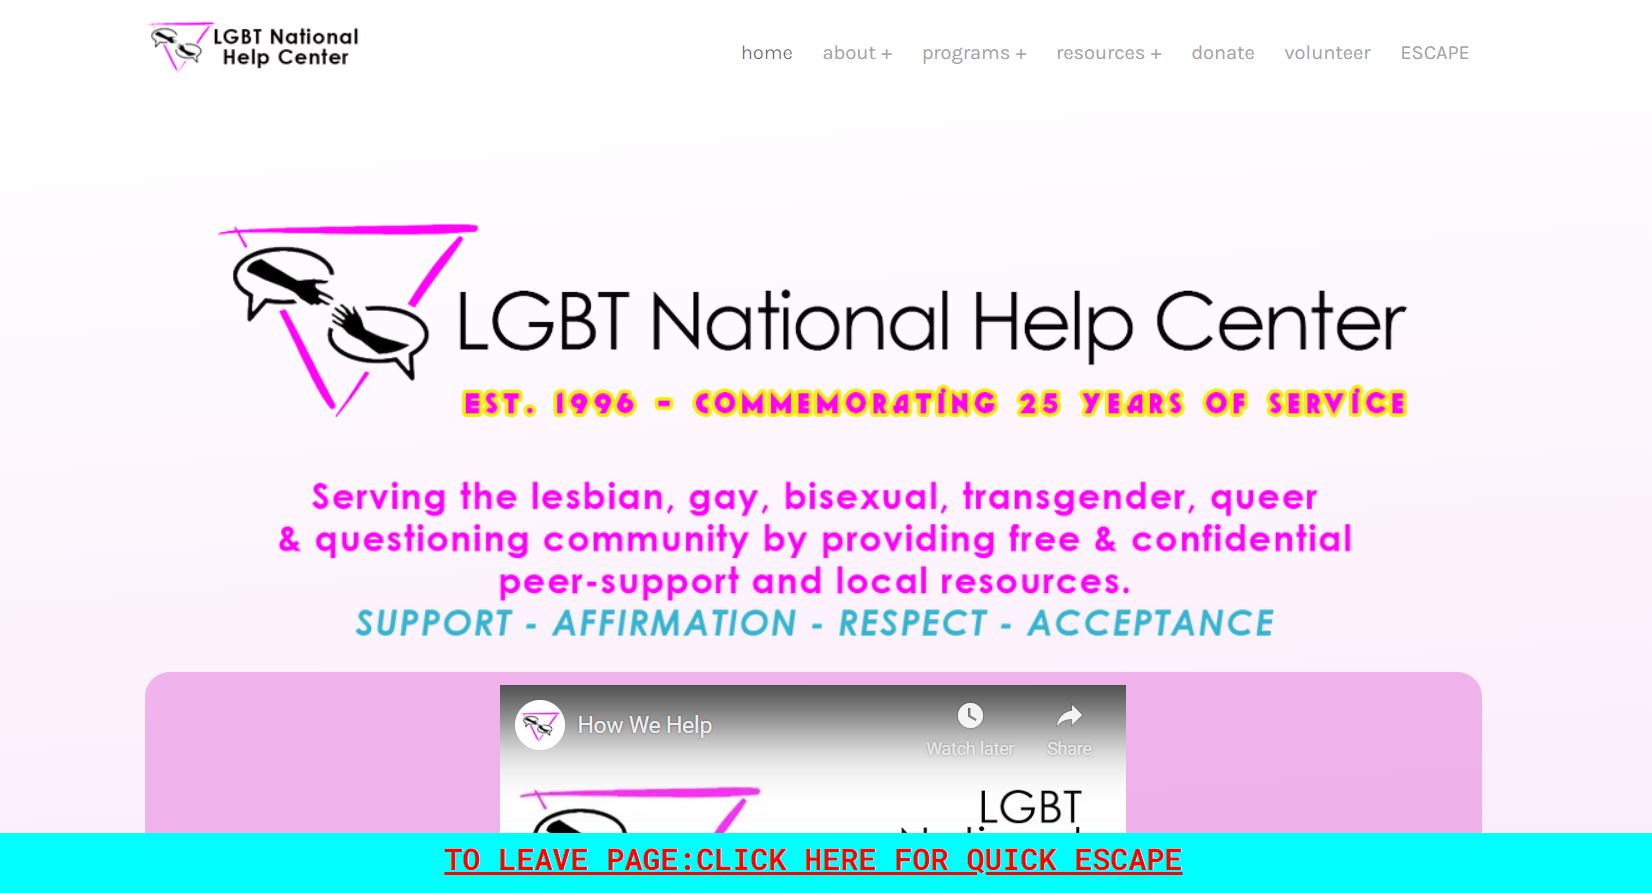 The Lesbian, Gay, Bisexual and Transgender (LGBT) National Help Center